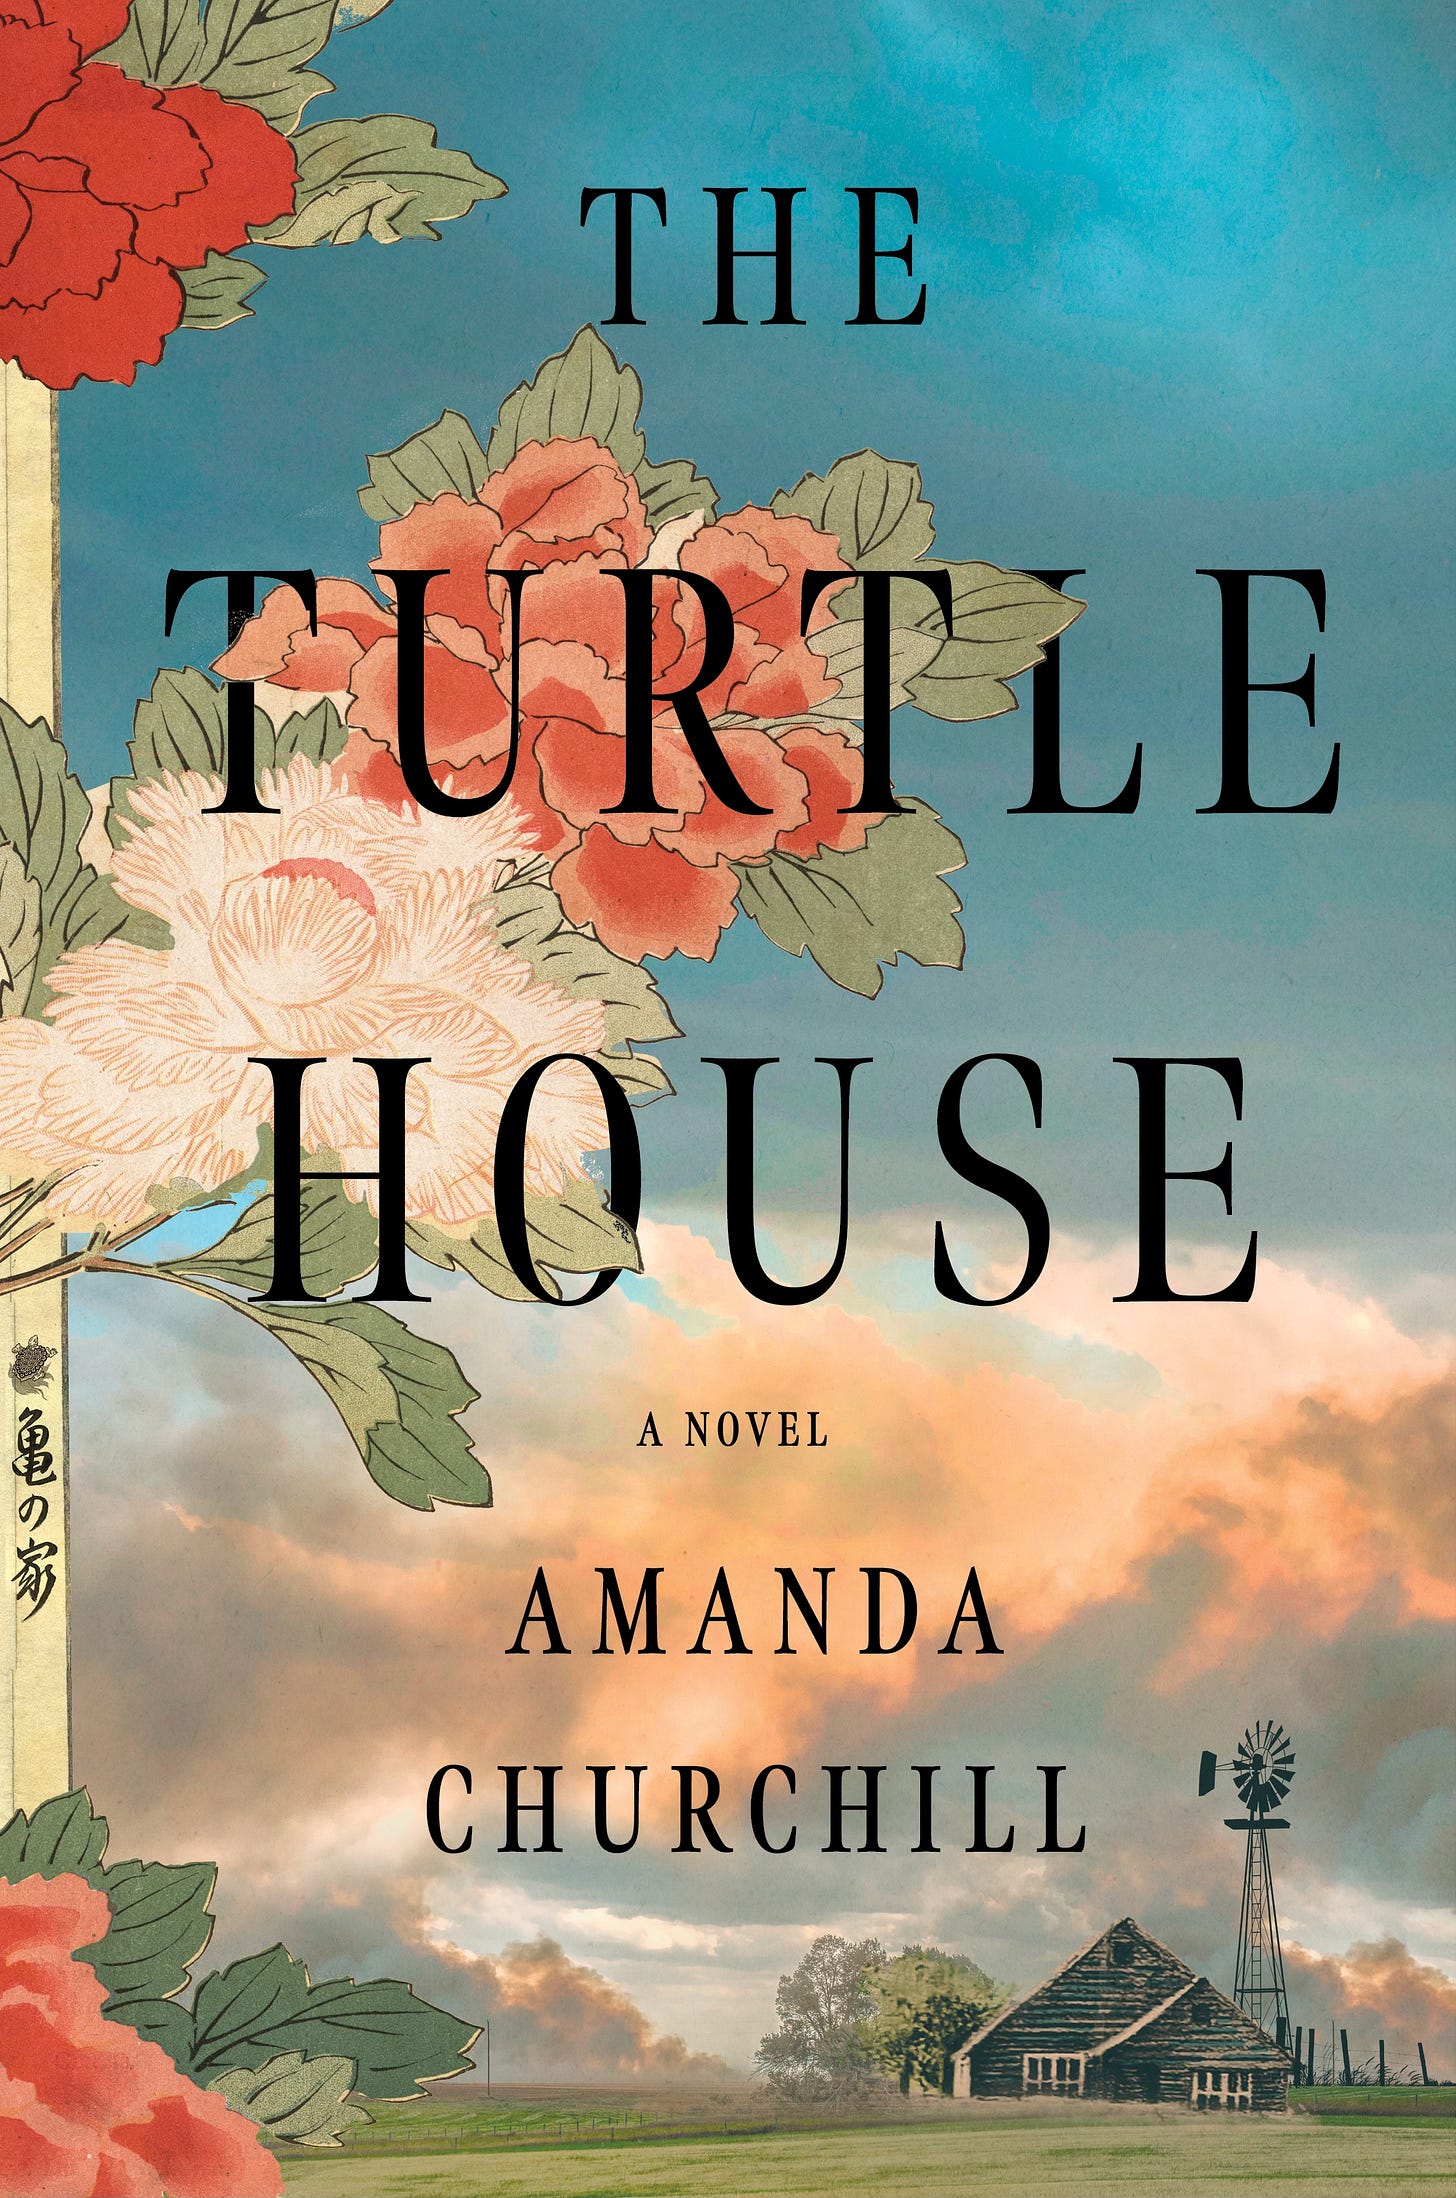 cover of Amanda Churchill's THE TURTLE HOUSE